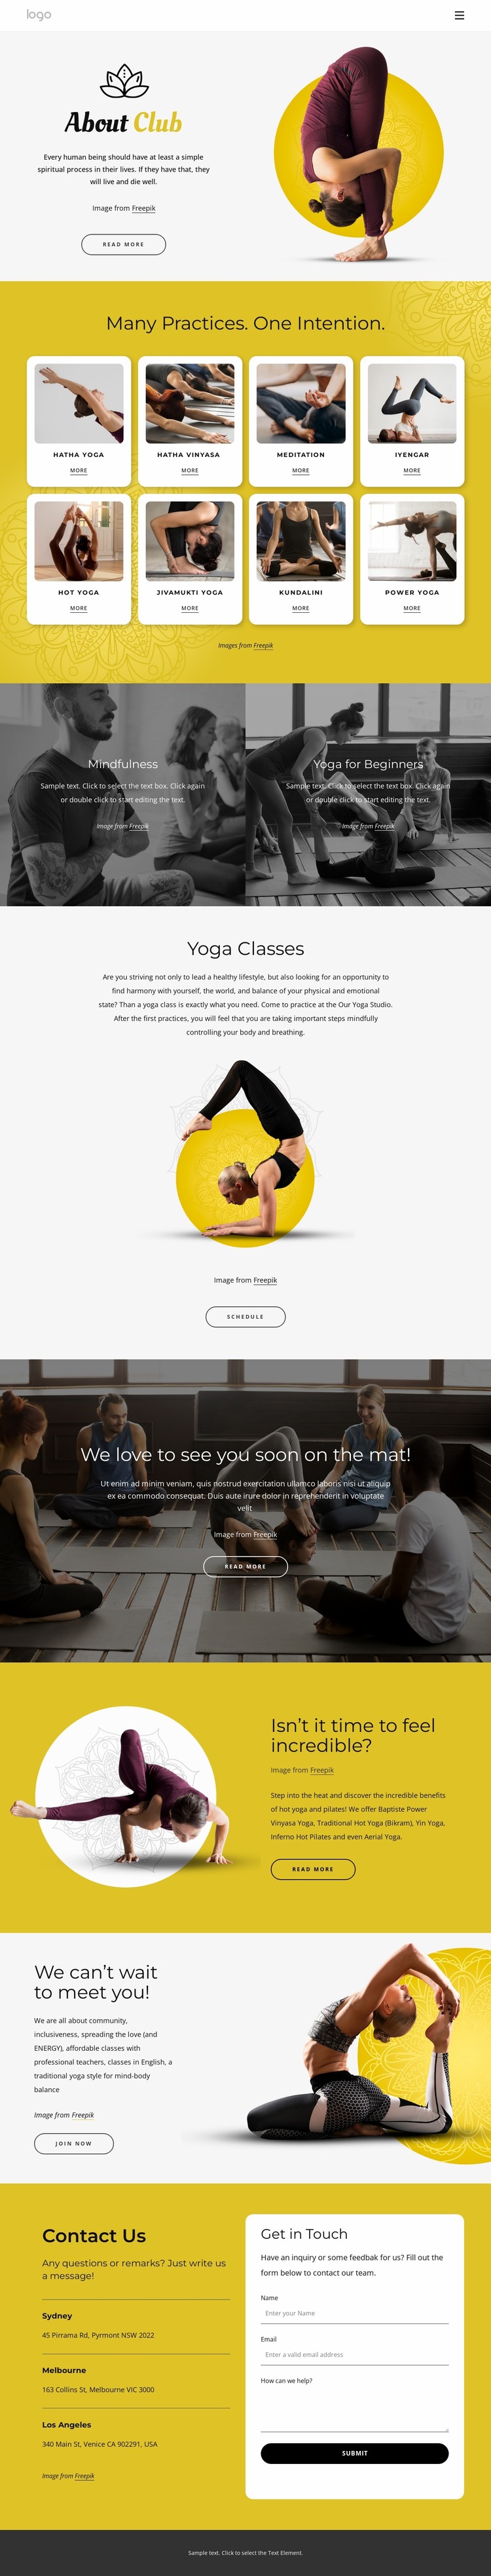 Physical, ethical and spiritual practice Html Website Builder